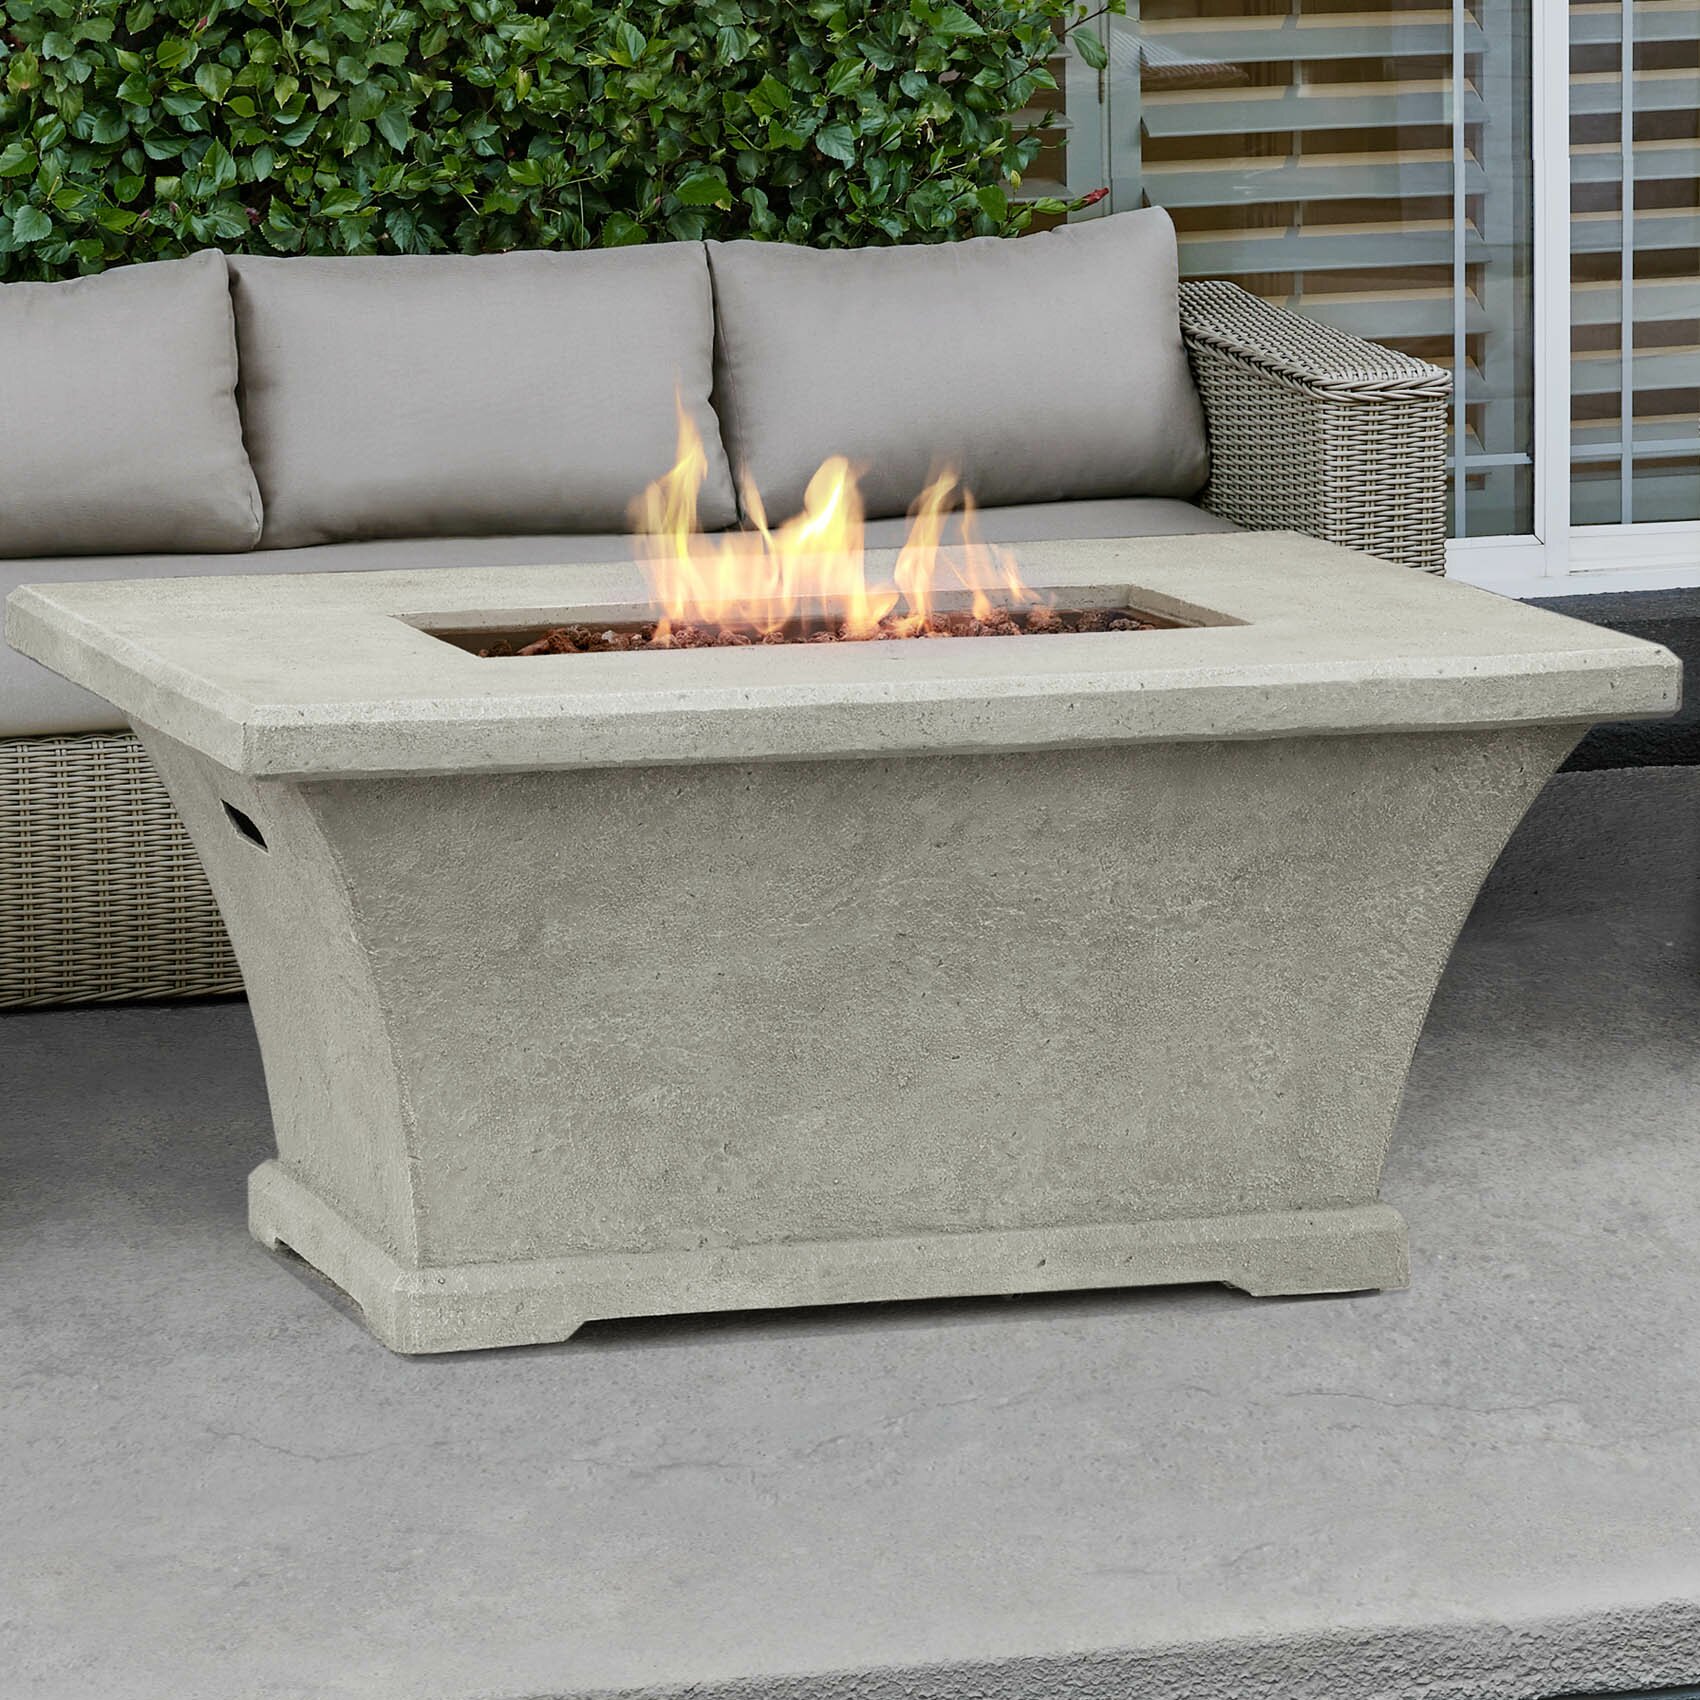 Real Flame Monaco Rectangle Propane Fire Pit Table ...